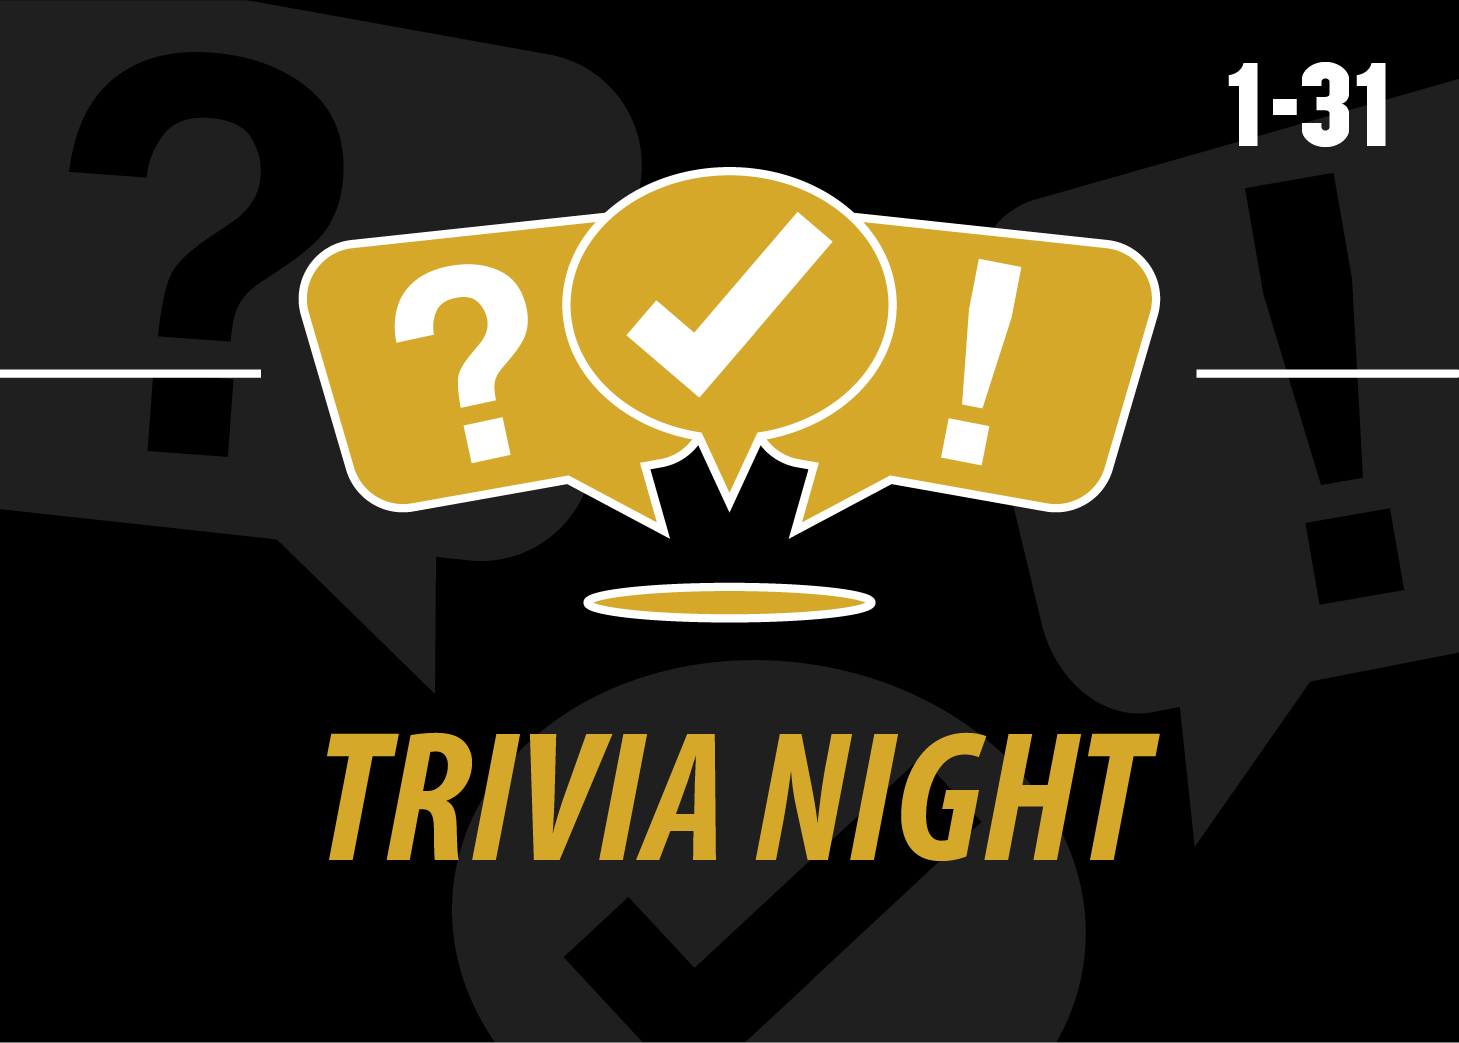 Graphic: Three gold speech bubbles, each with a white punctuation mark in it. left to right: question mark, check mark, exclamation mark. There is gold text reading "Trivia Night" at the bottom